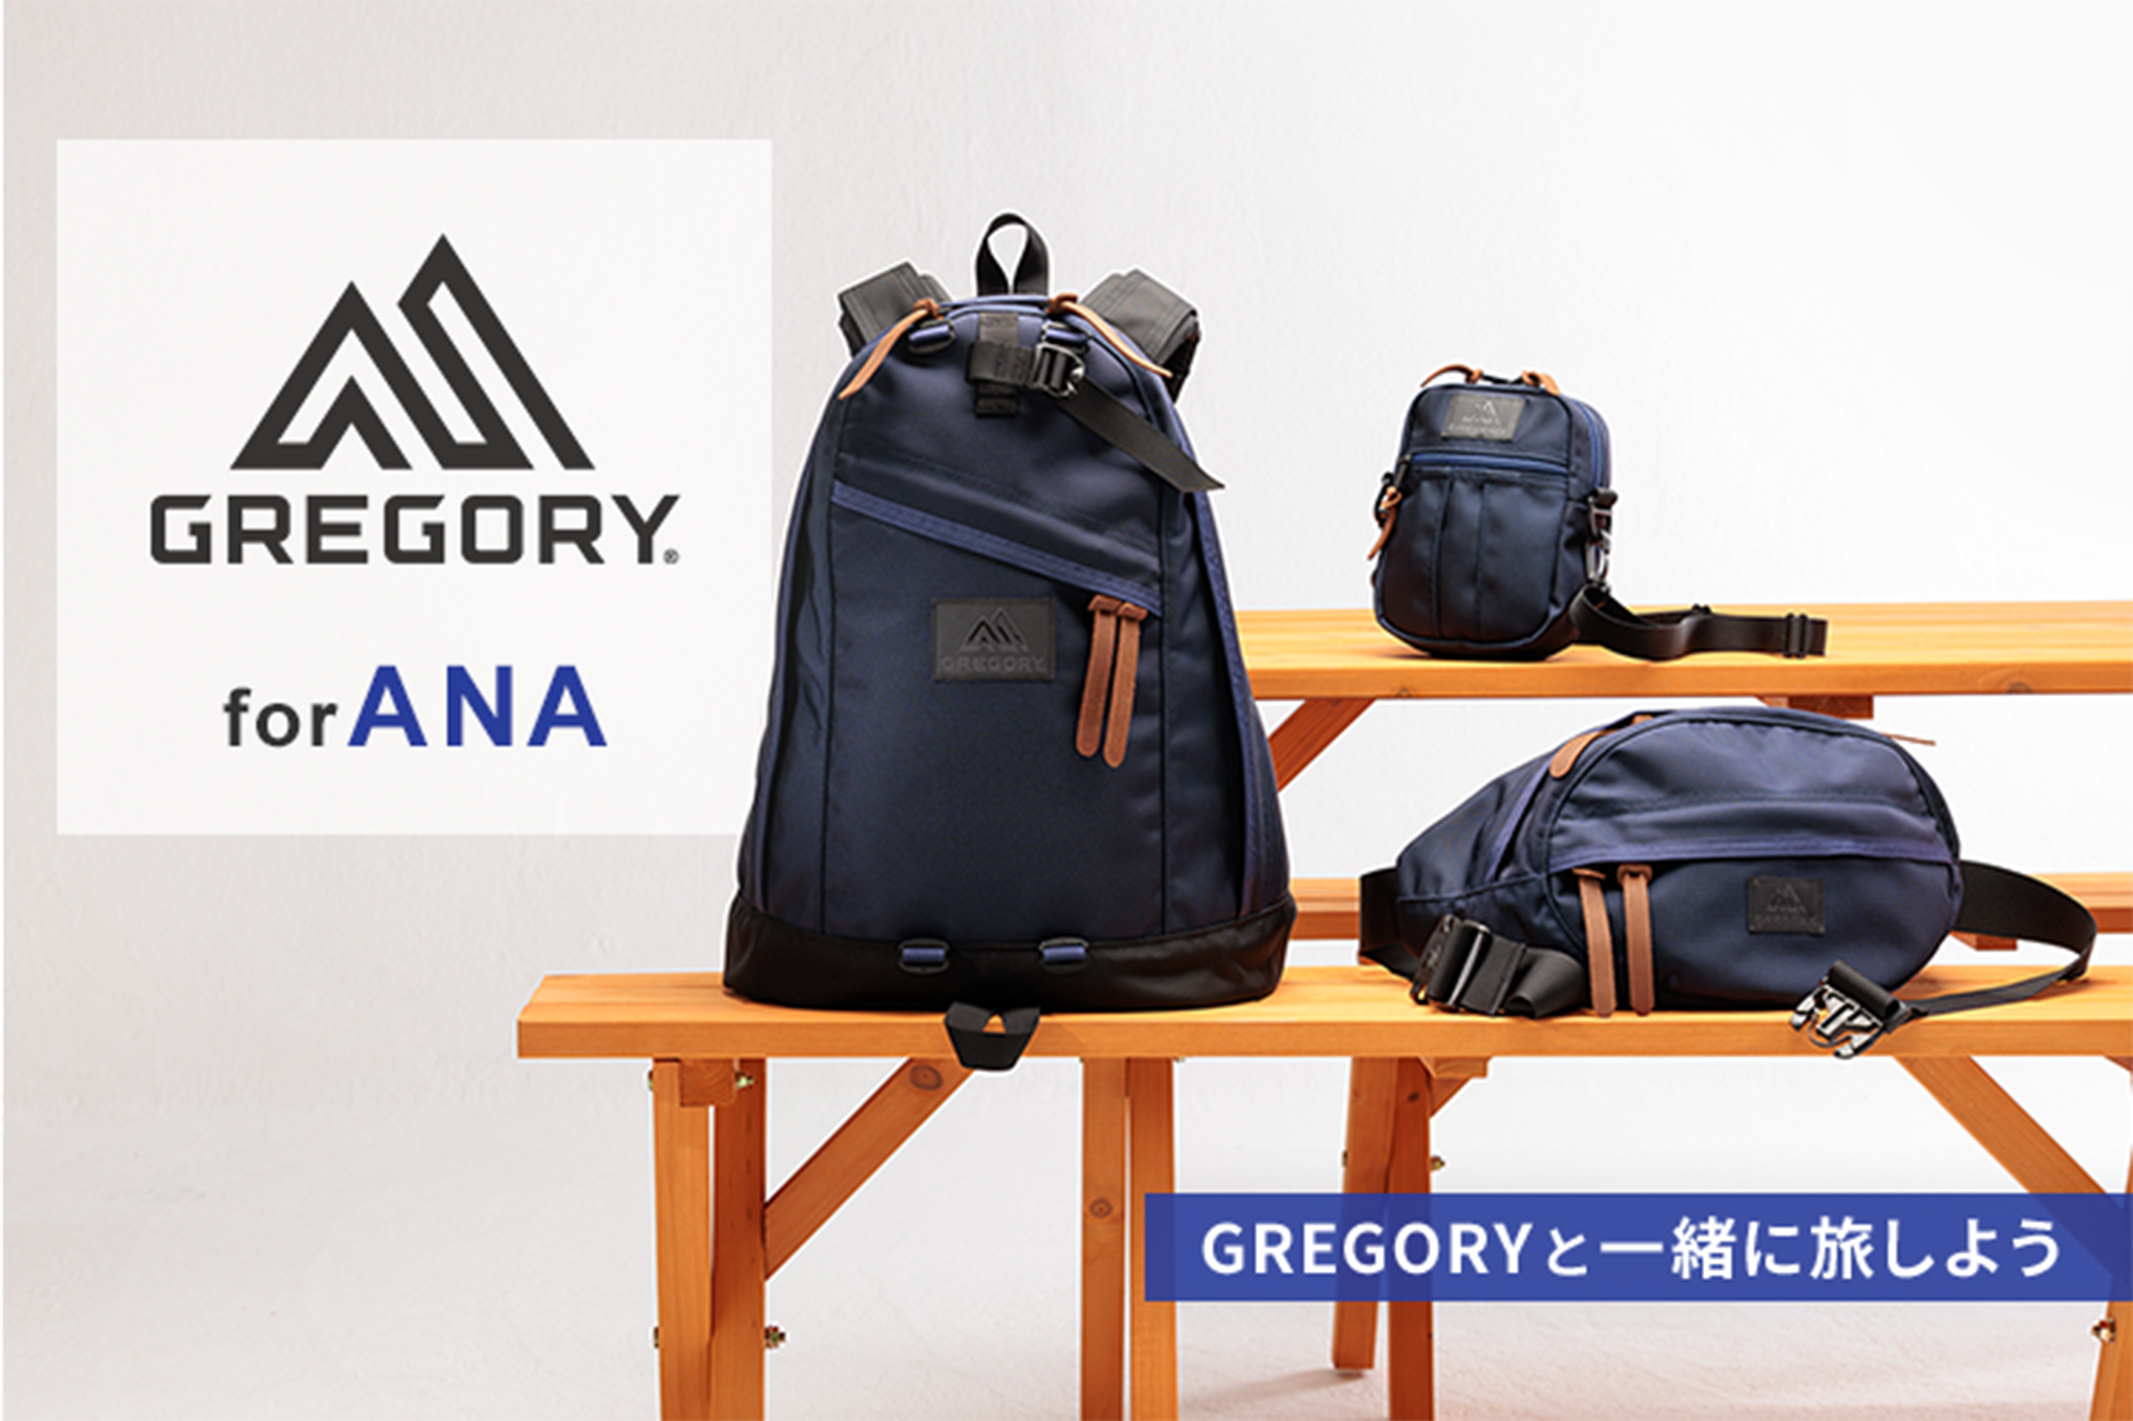 GREGORY for ANA| ANAショッピング A-style